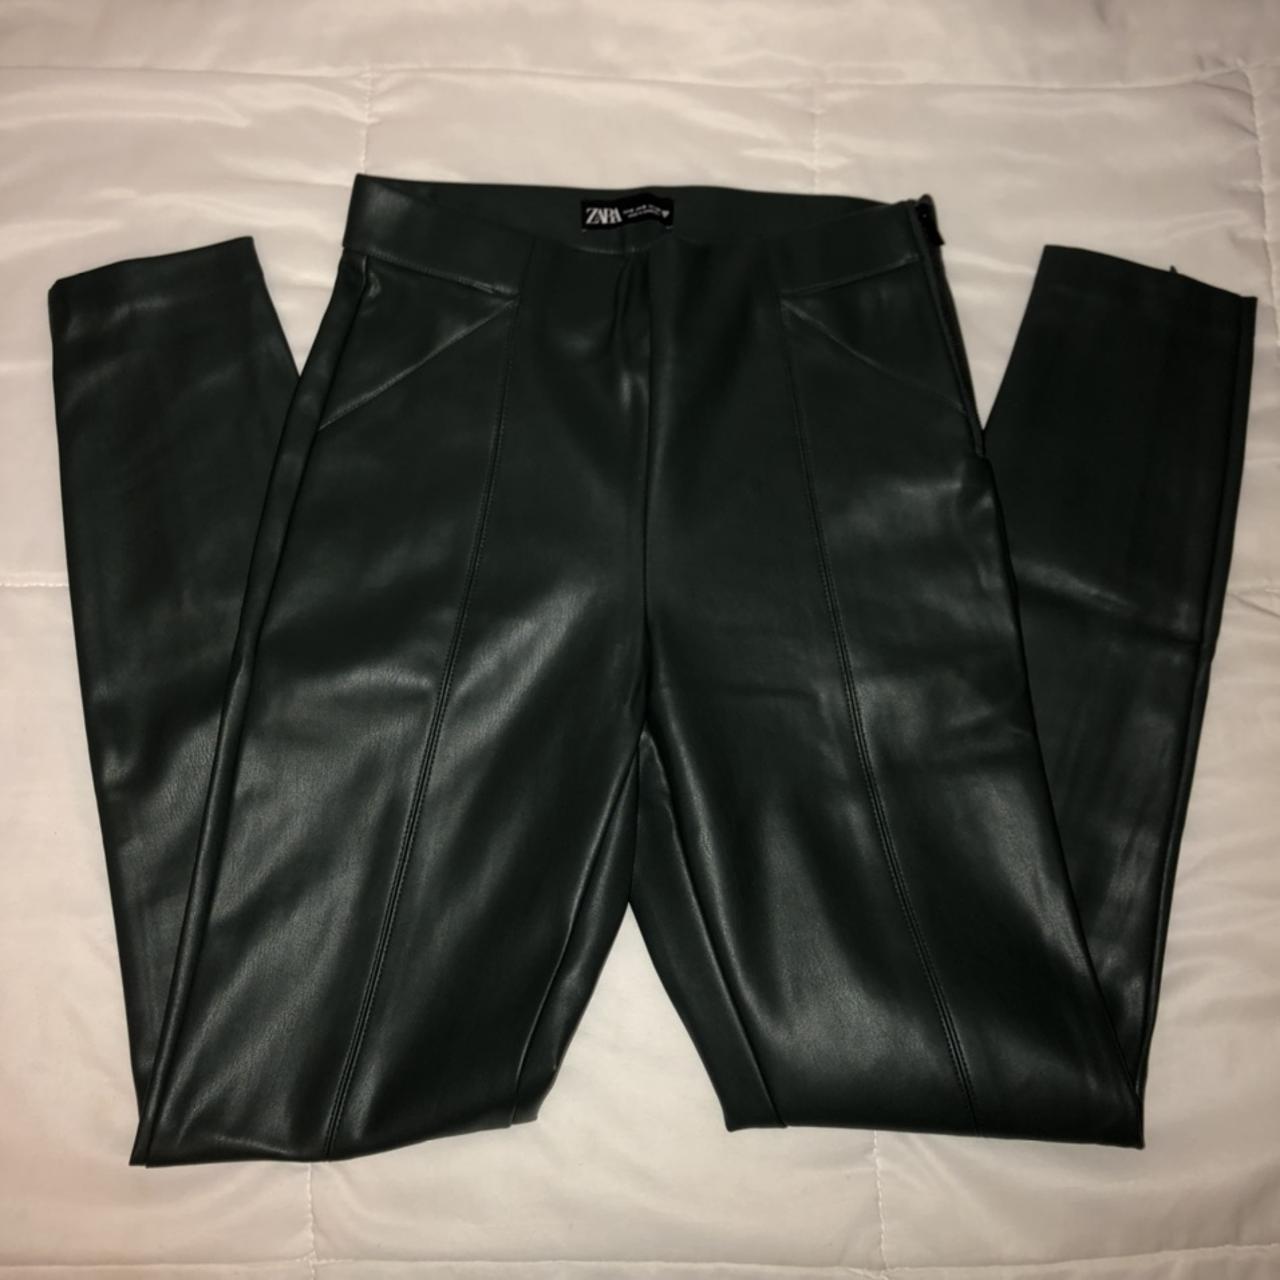 Zara Black Leather Pants with Zippers Size: Small. - Depop